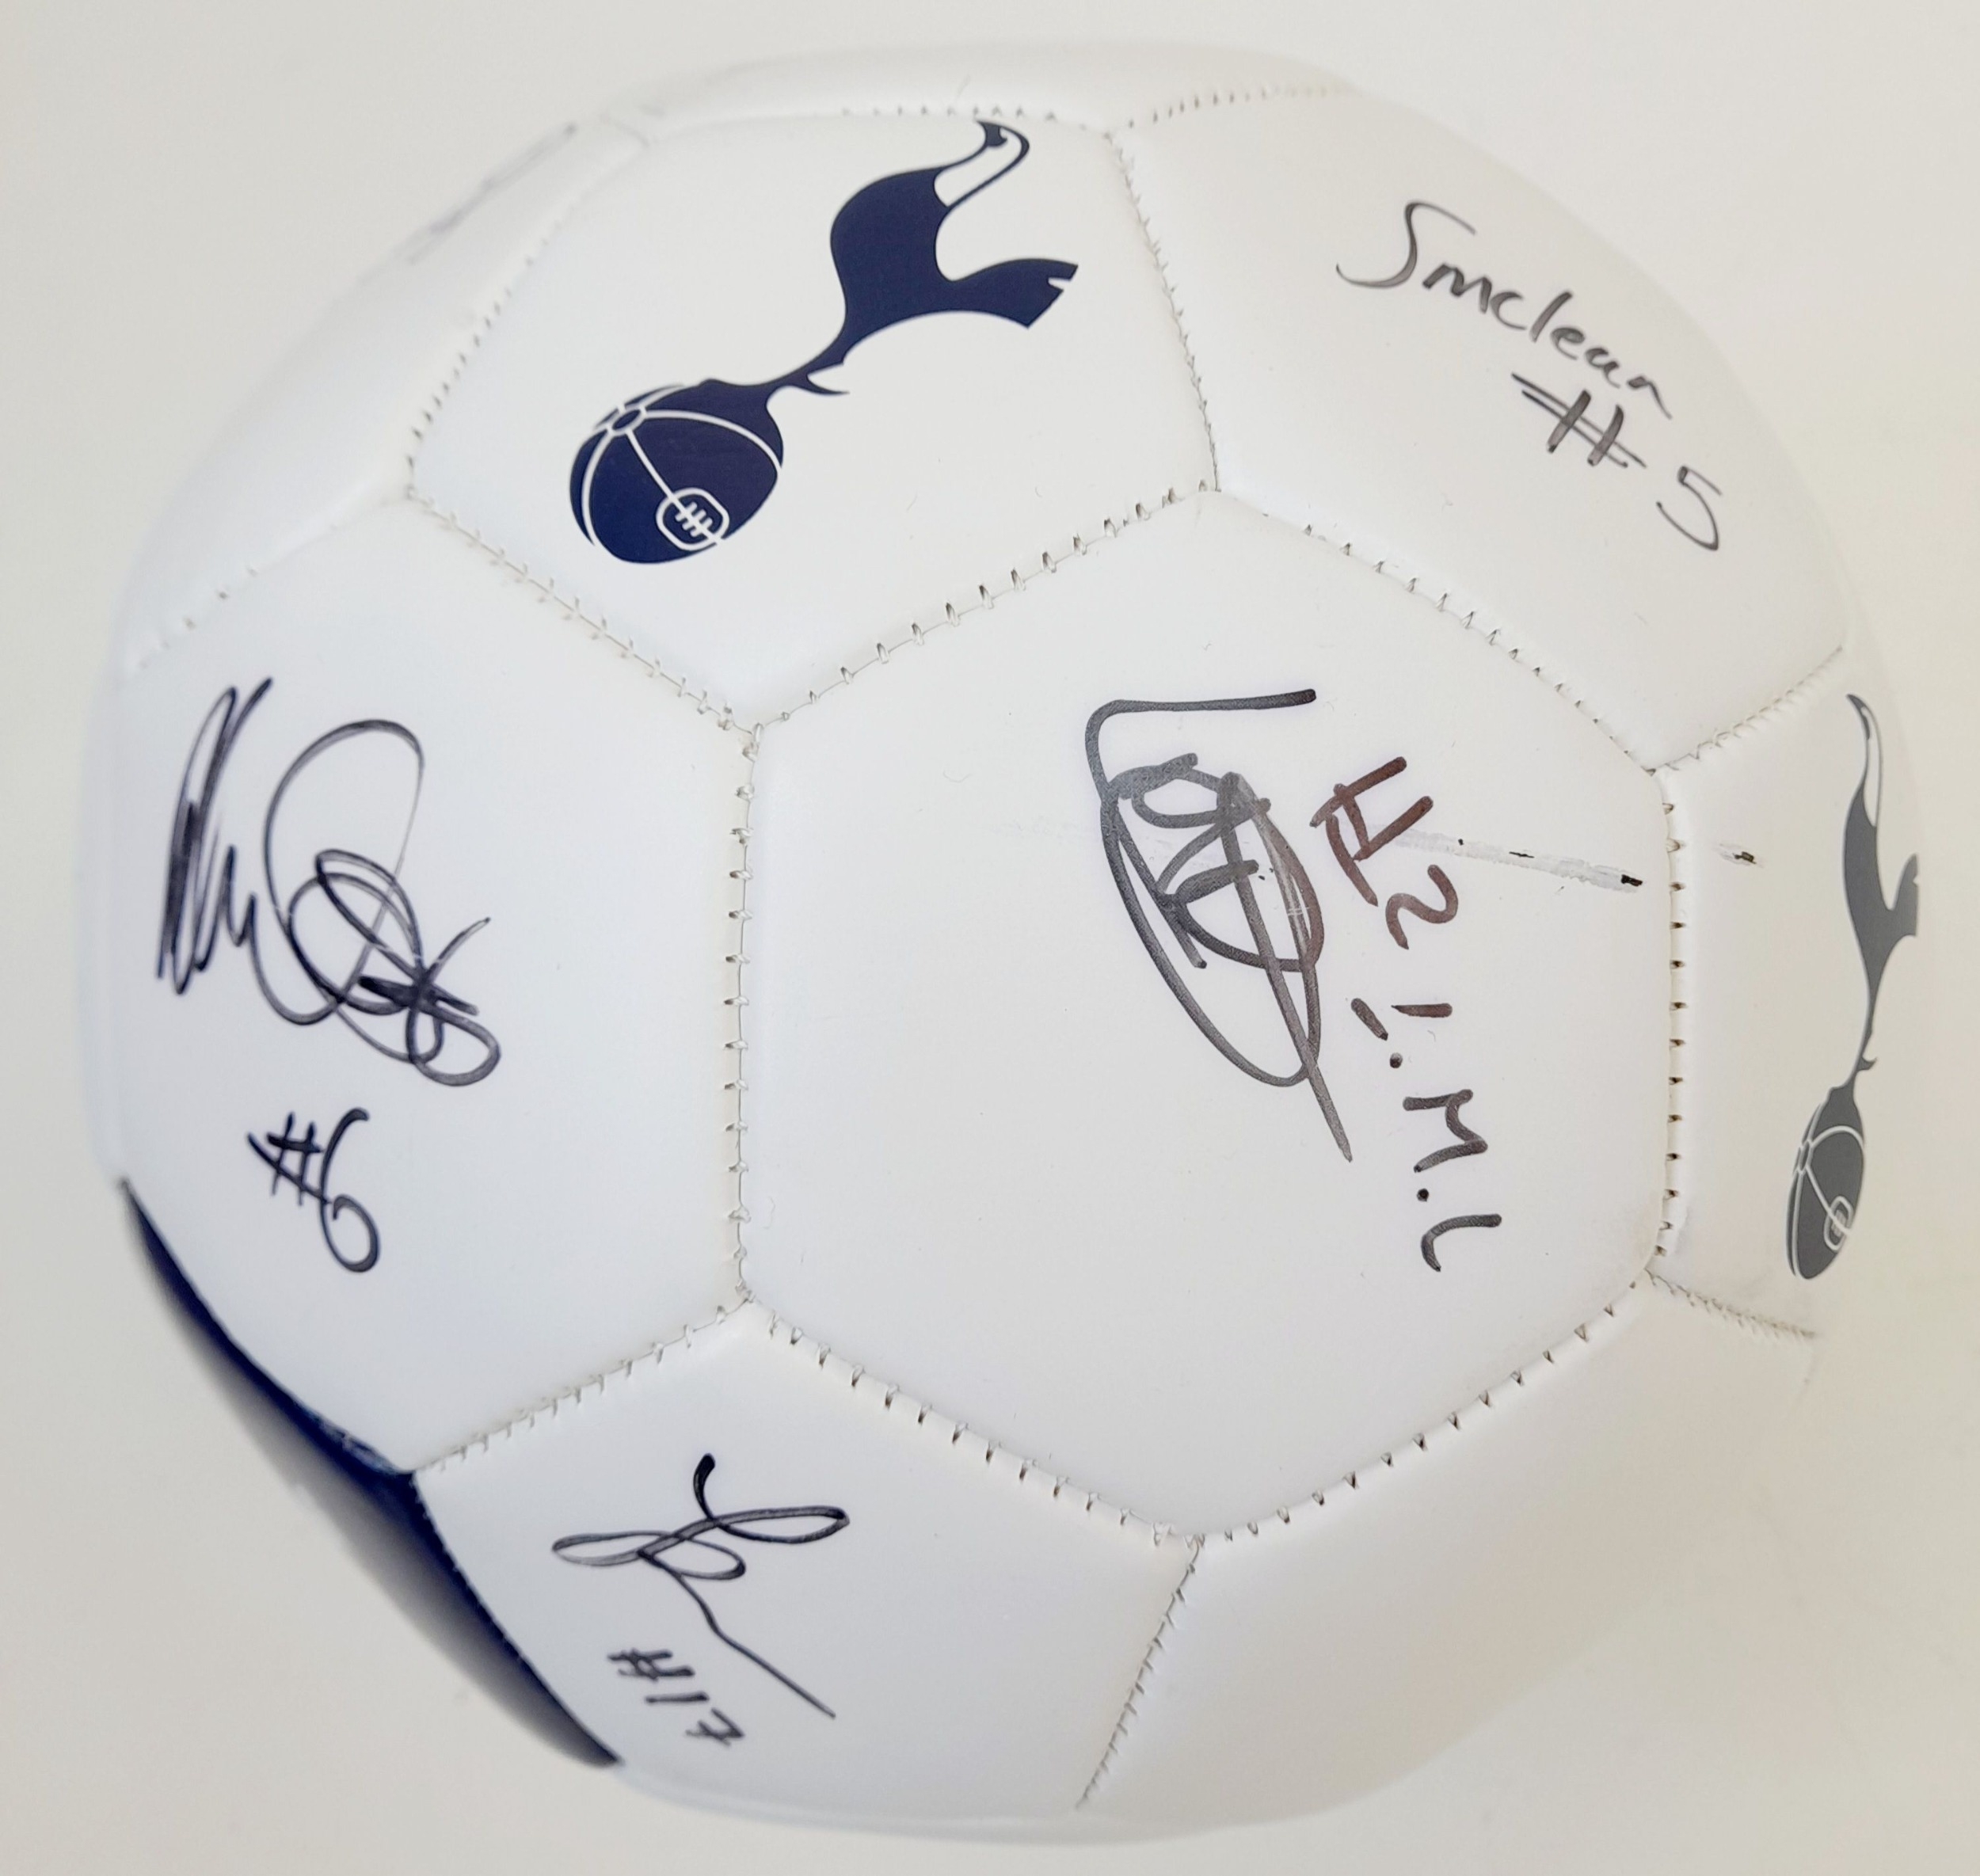 A Tottenham FC Official Signature Signed Football - Spurs Ladies! - Image 3 of 5